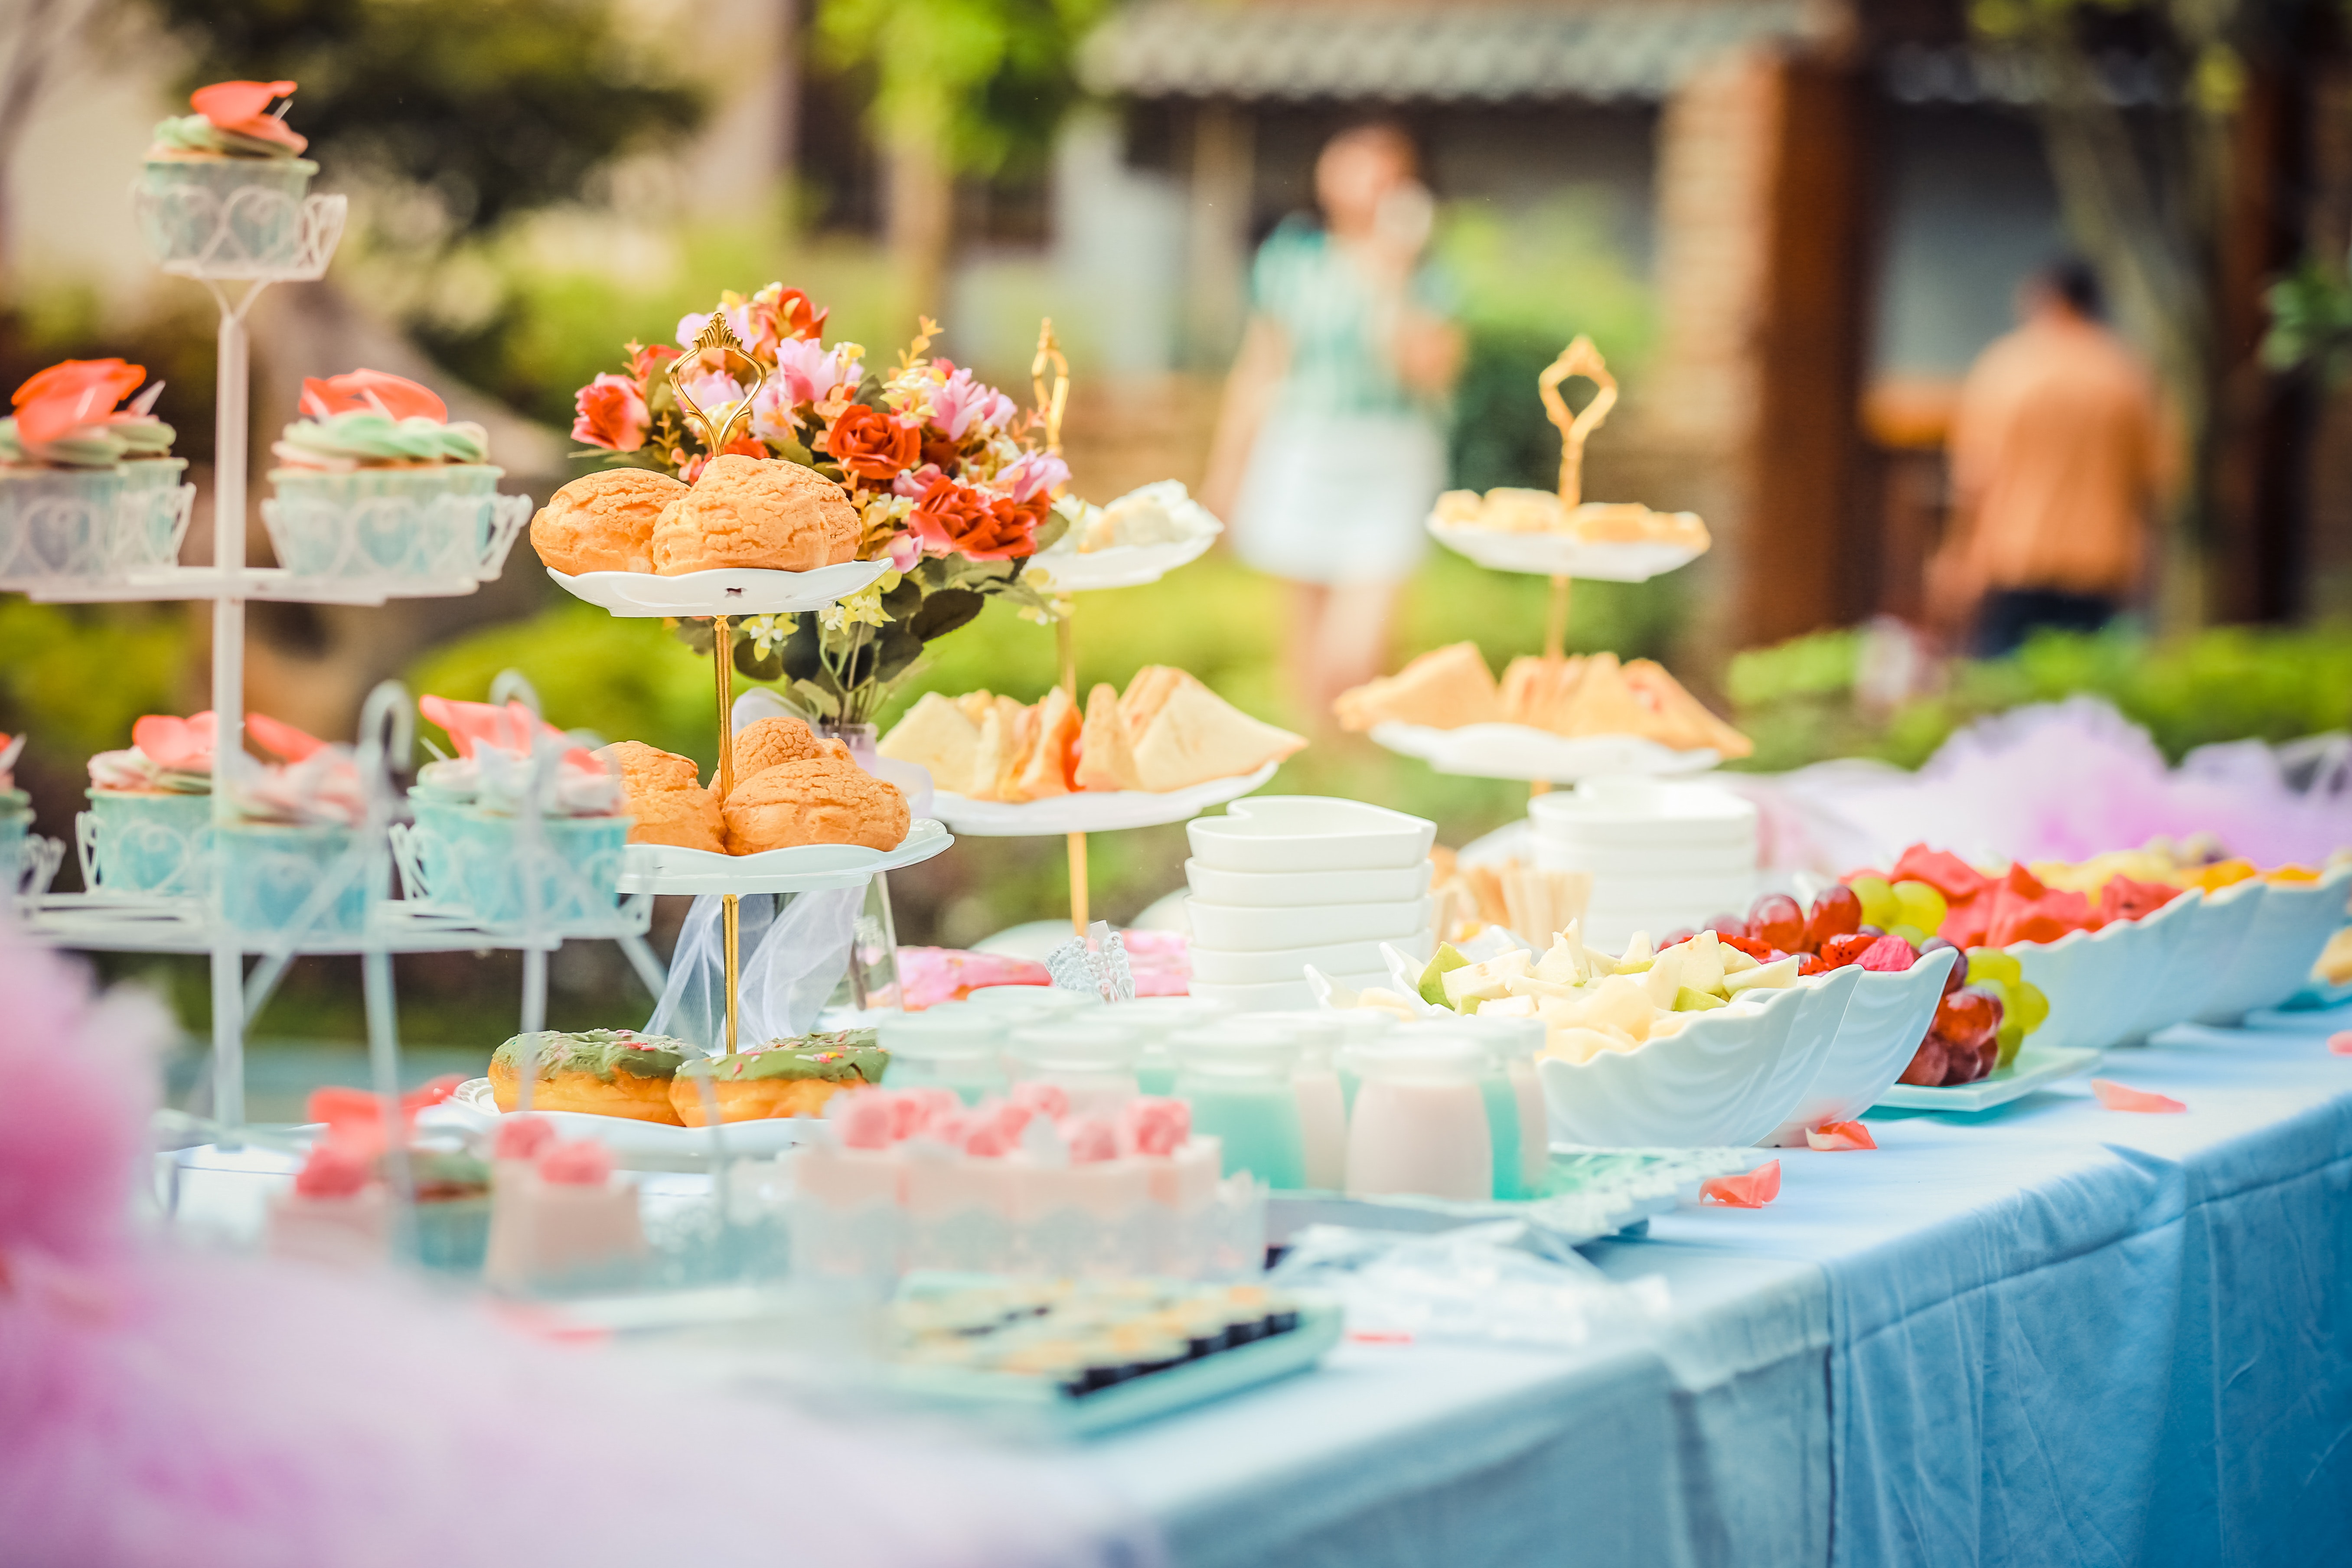 Your Complete Guide to throw a Baby Shower #babyshower #babyshowerideas